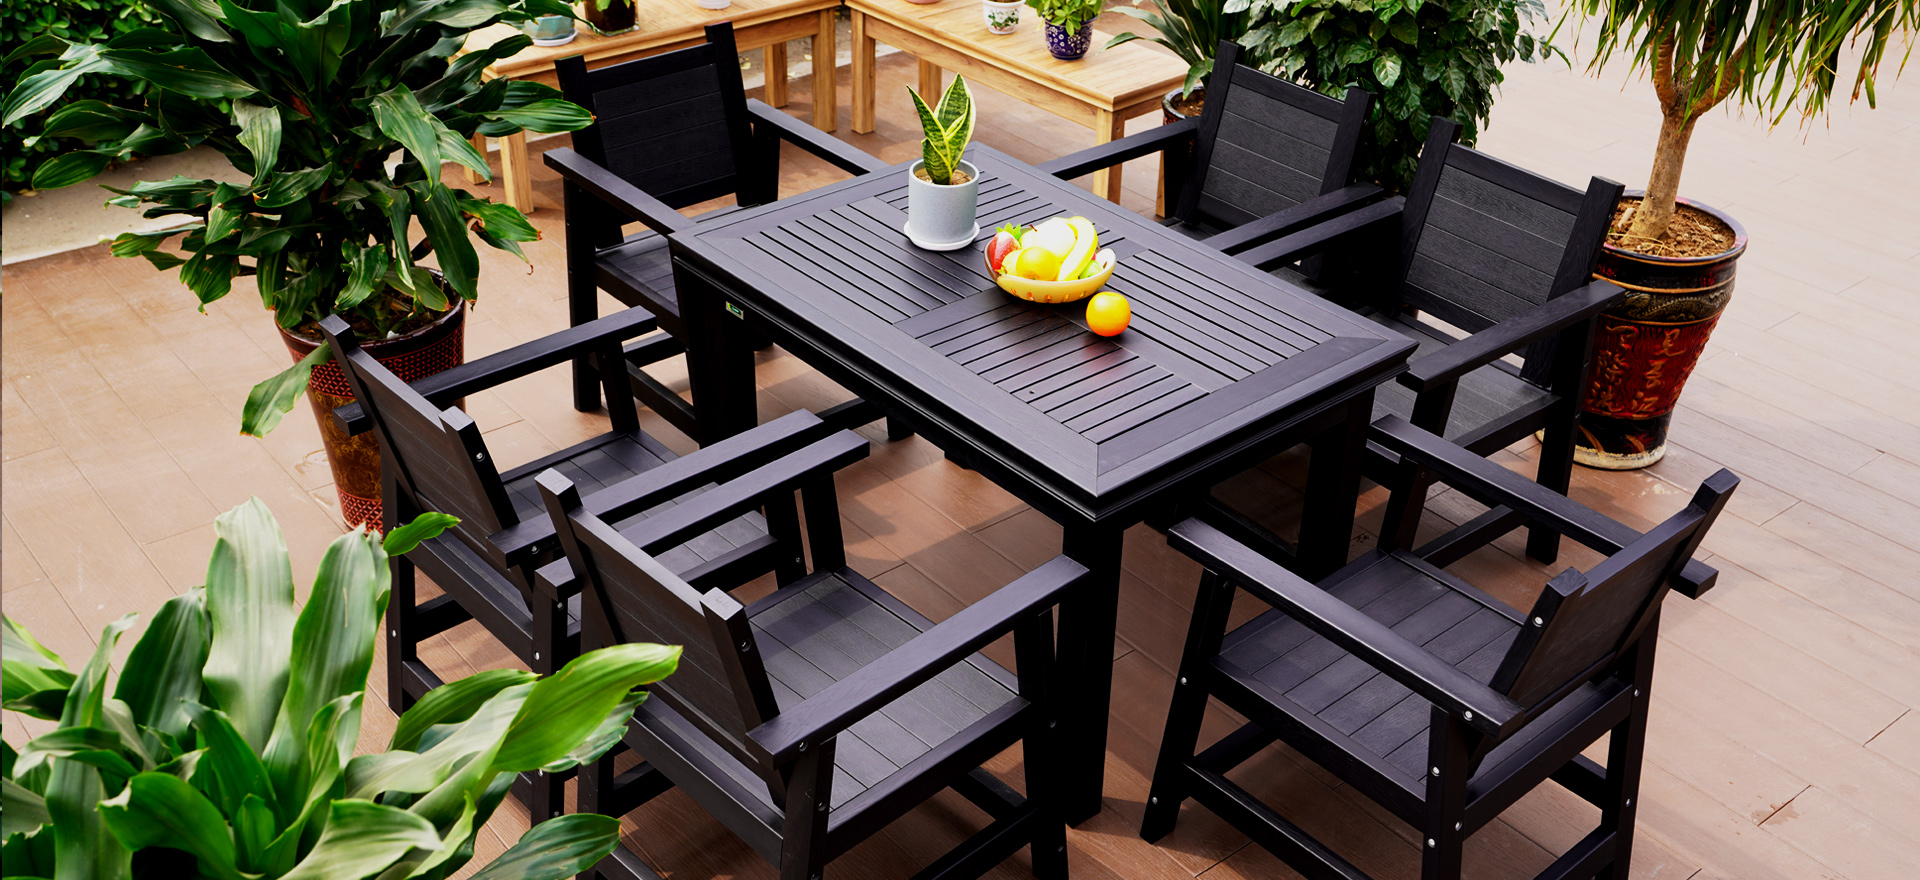  4 points you need to pay attention to when purchasing outdoor furniture 